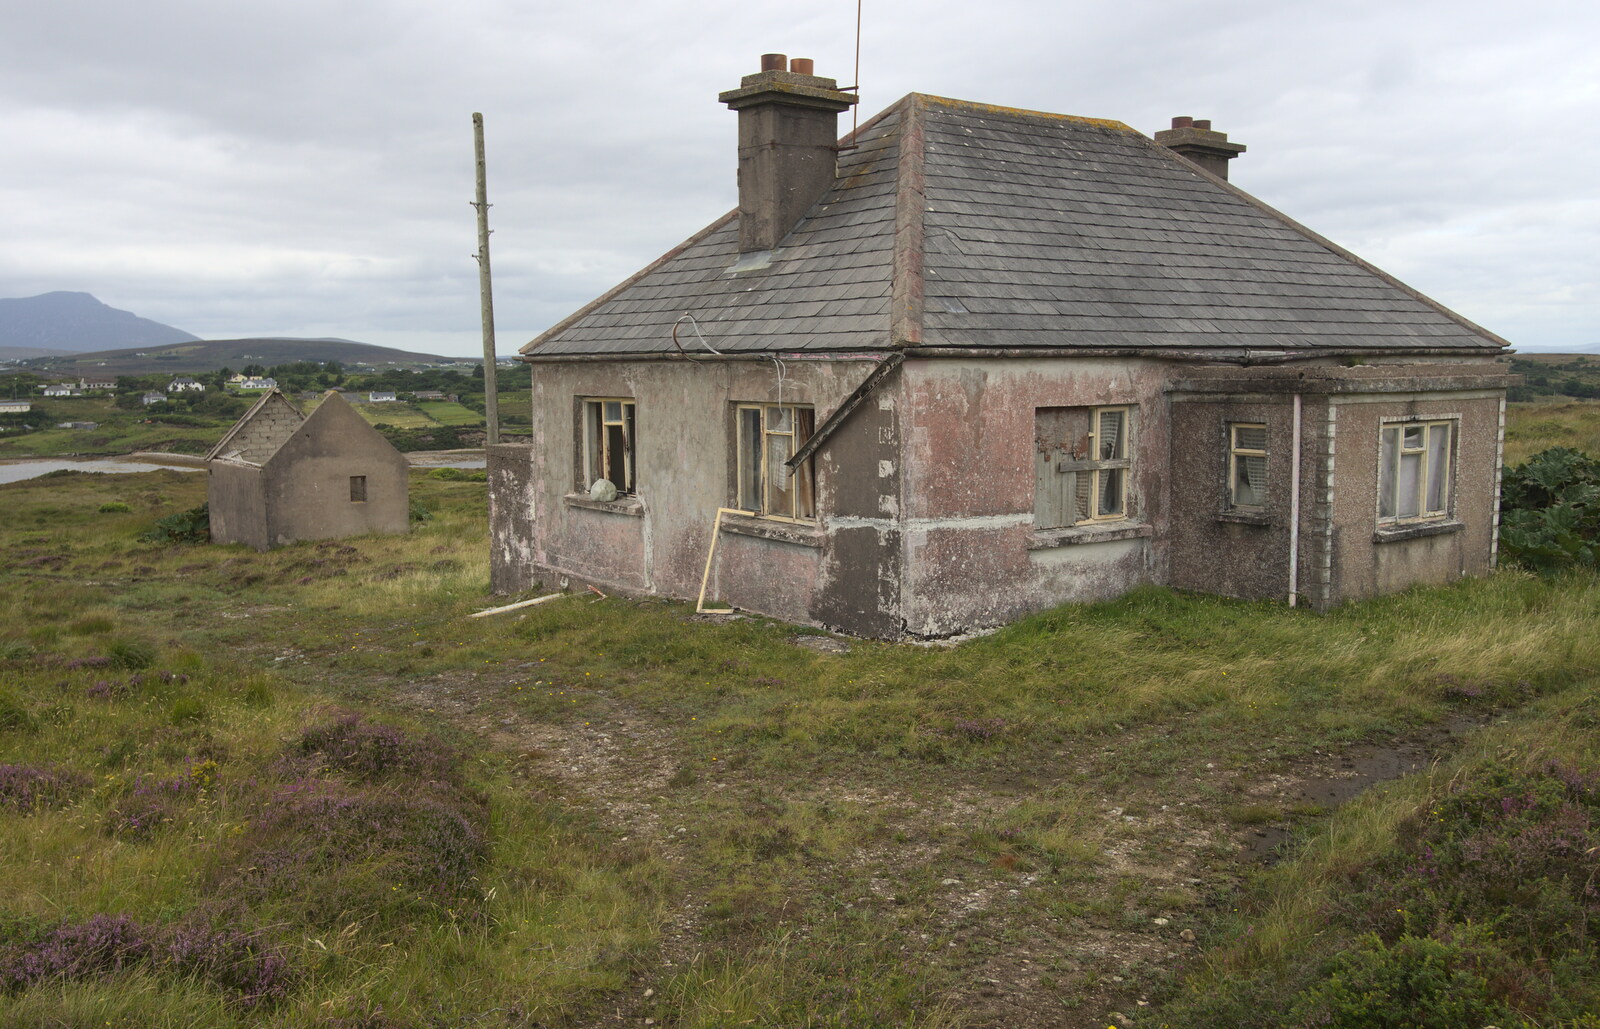 Another derelict house in Belfarsad from From Achill to Strokestown, Mayo and Roscommon, Ireland - 10th August 2017